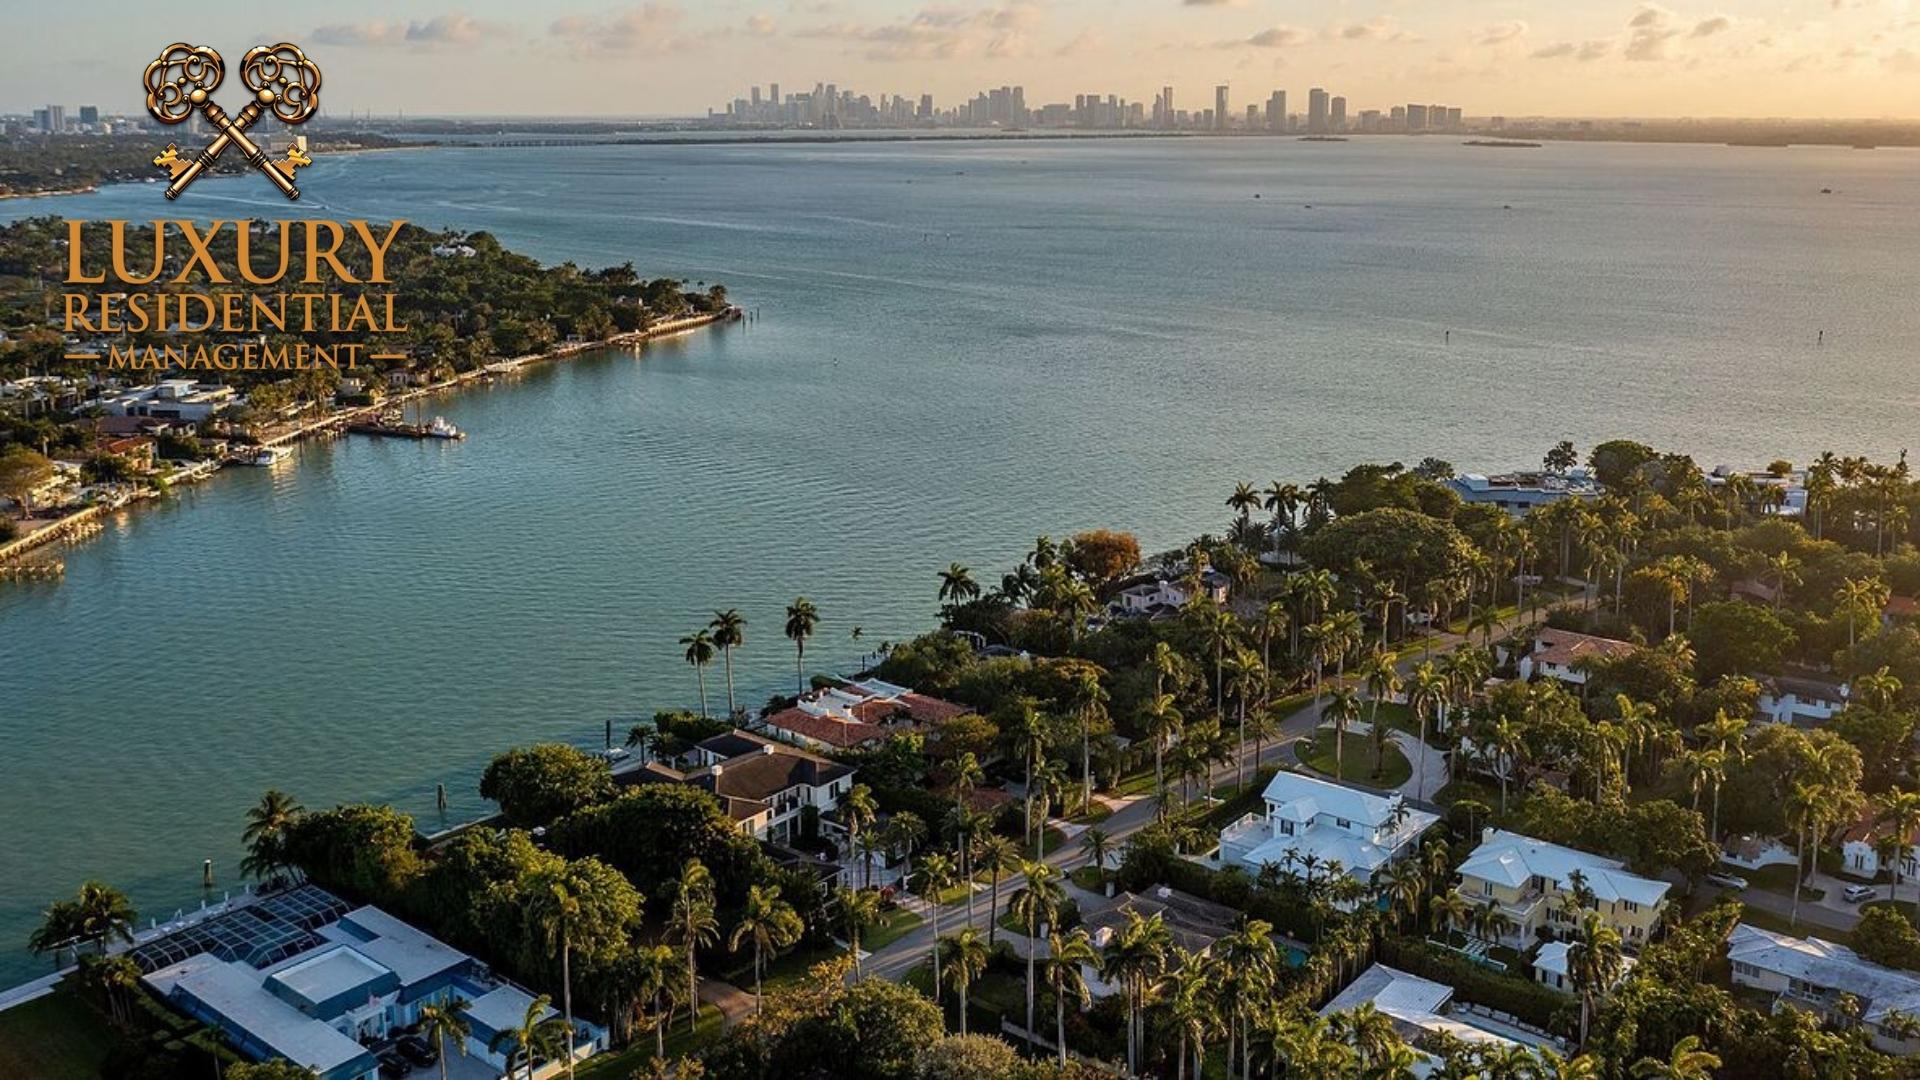 This is the most expensive property in the history of Miami